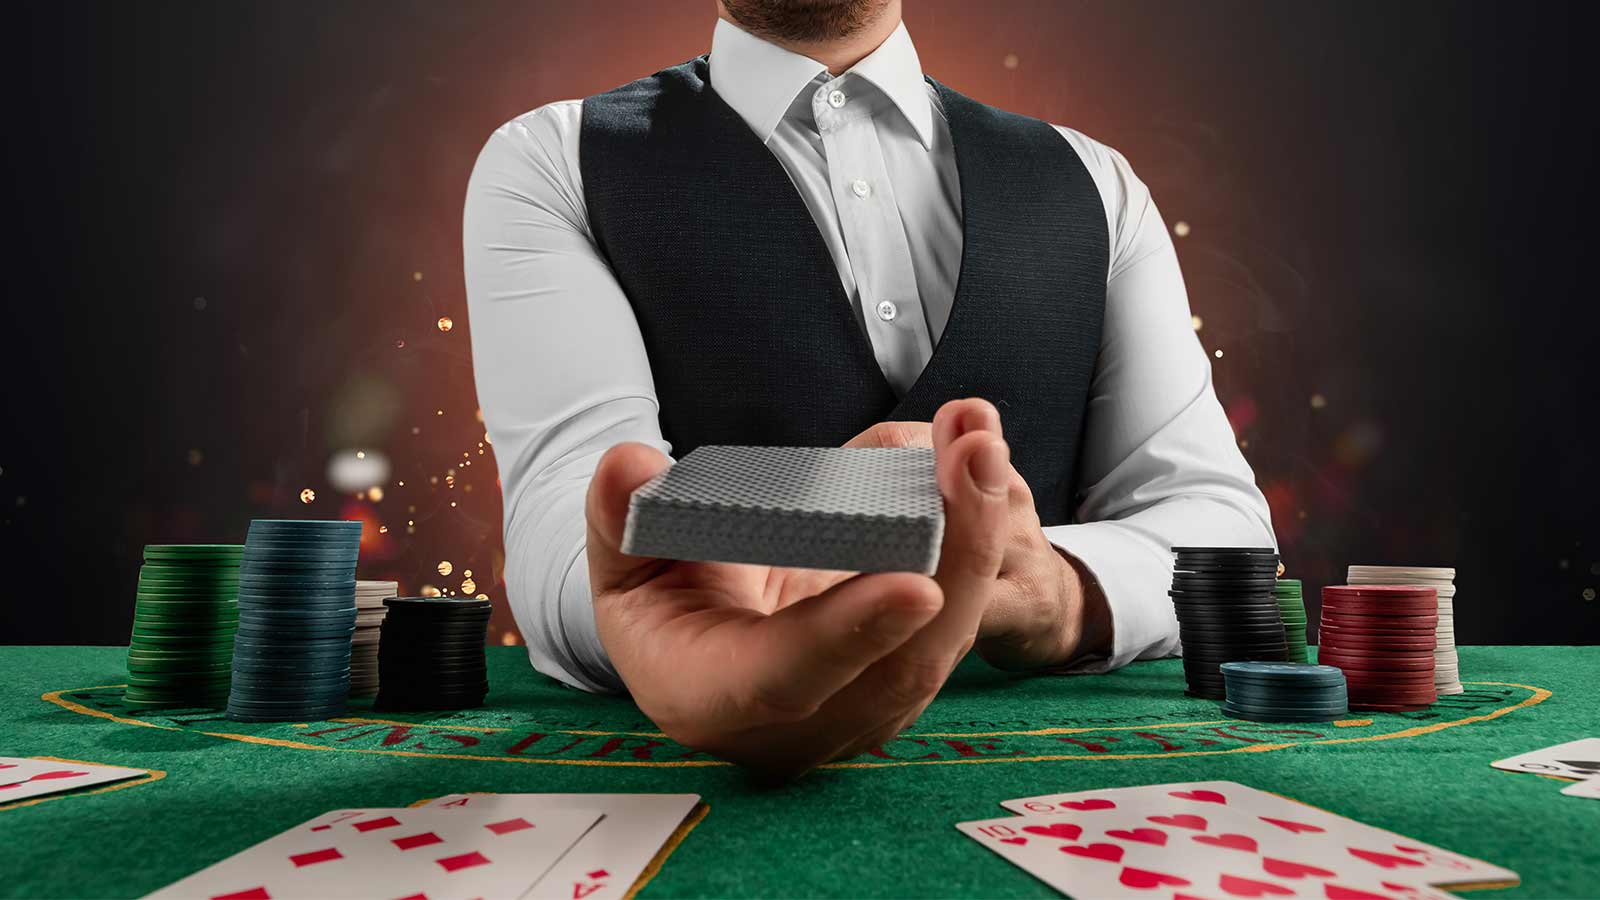 10 Ideas About who can own a casino That Really Work